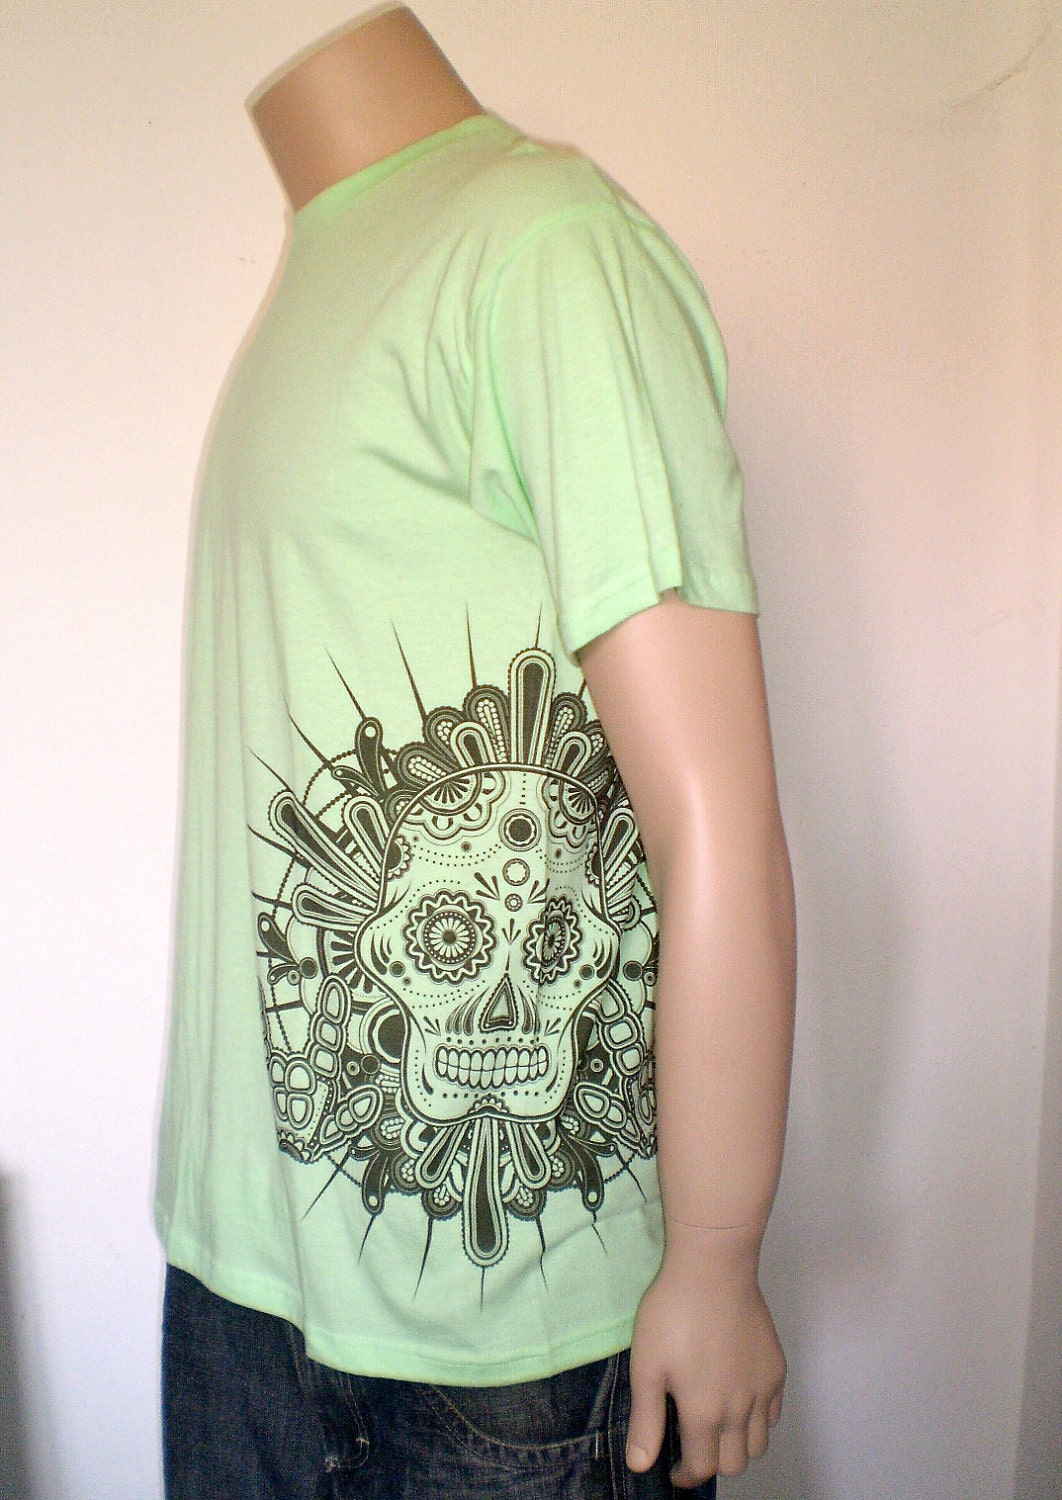 Printed T-shirt for men - mint tee - with sugar skull on the left side